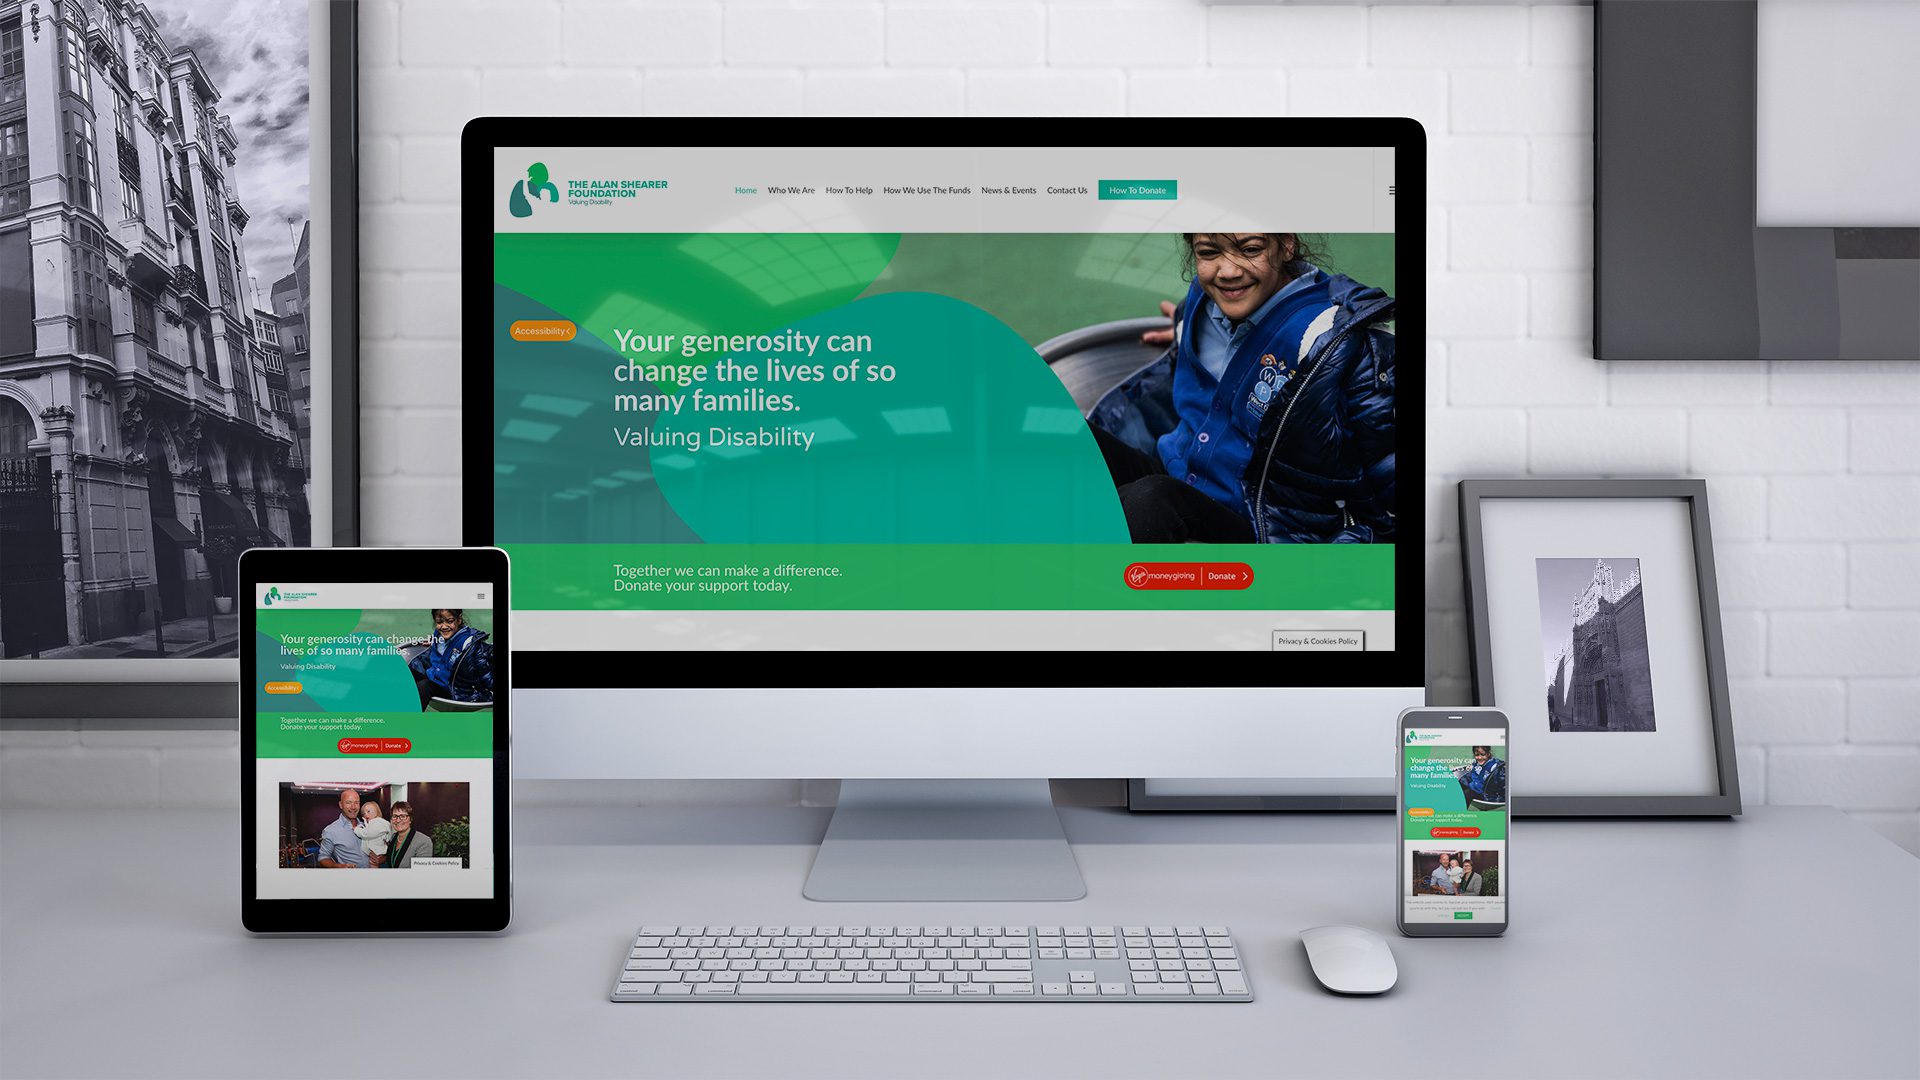 Alan Shearer Foundation website shown on various responsive devices on a desk